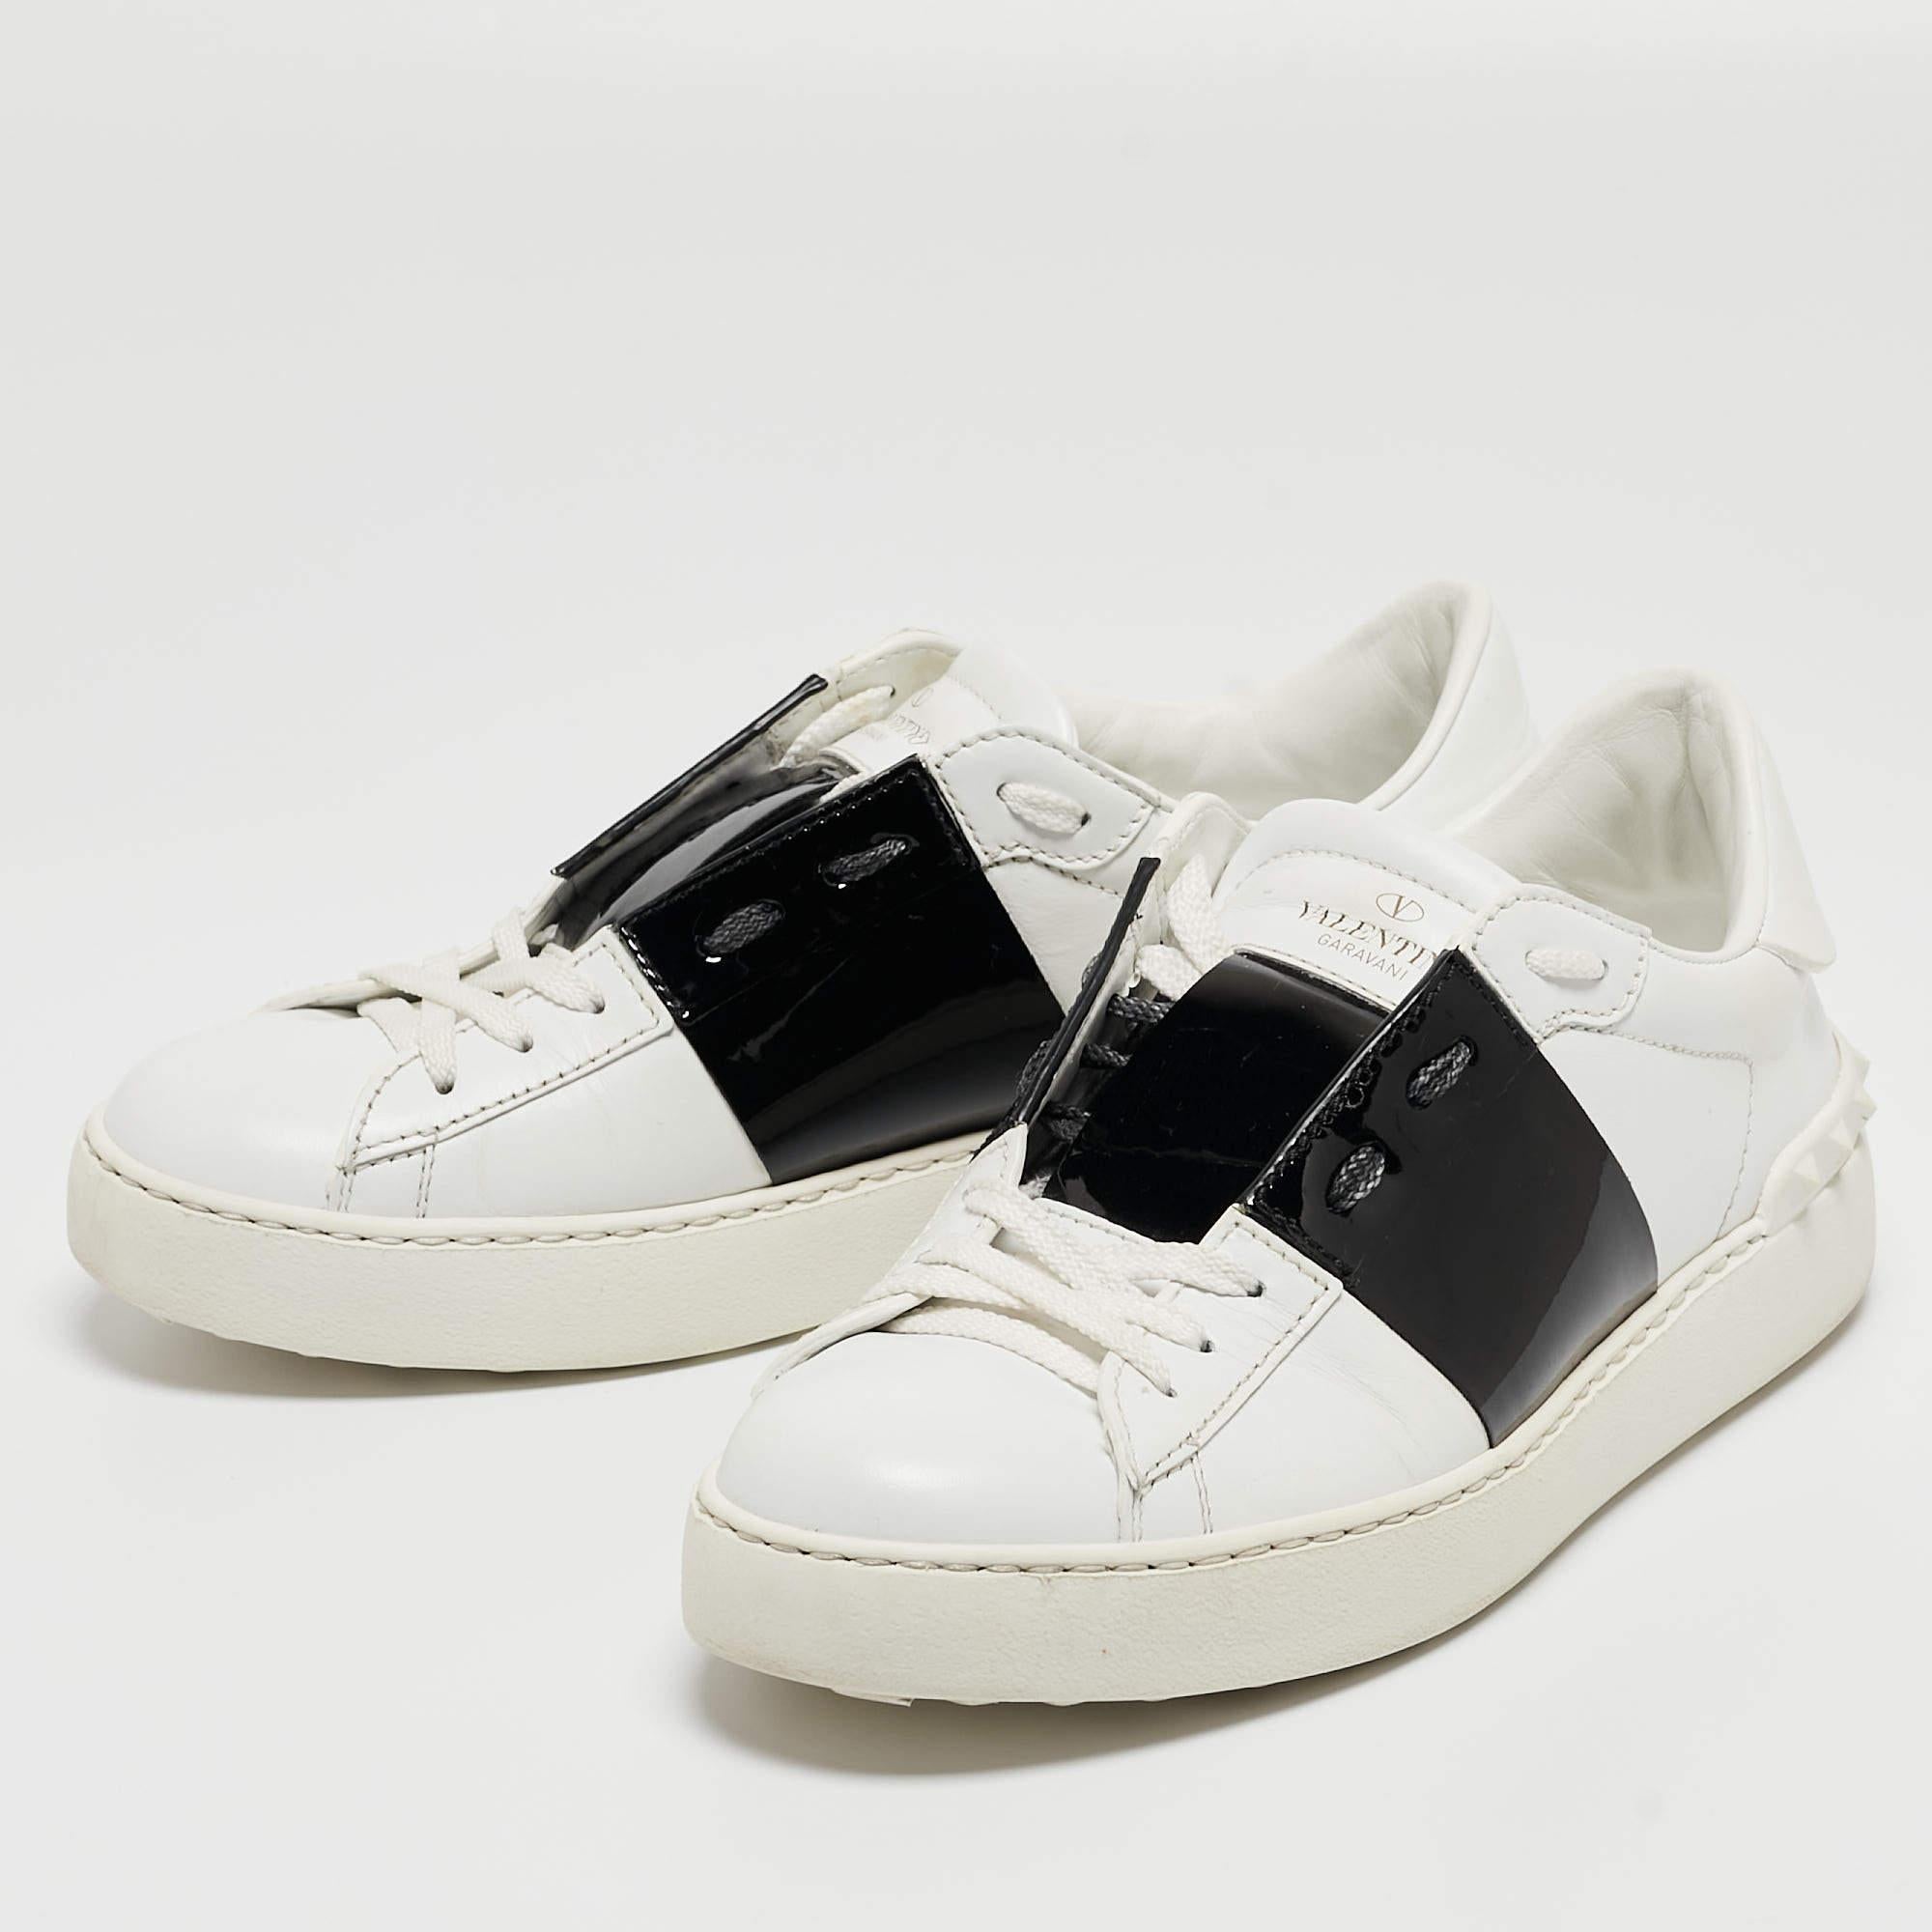 Upgrade your style with these Valentino sneakers. Meticulously designed for fashion and comfort, they're the ideal choice for a trendy and comfortable stride.

